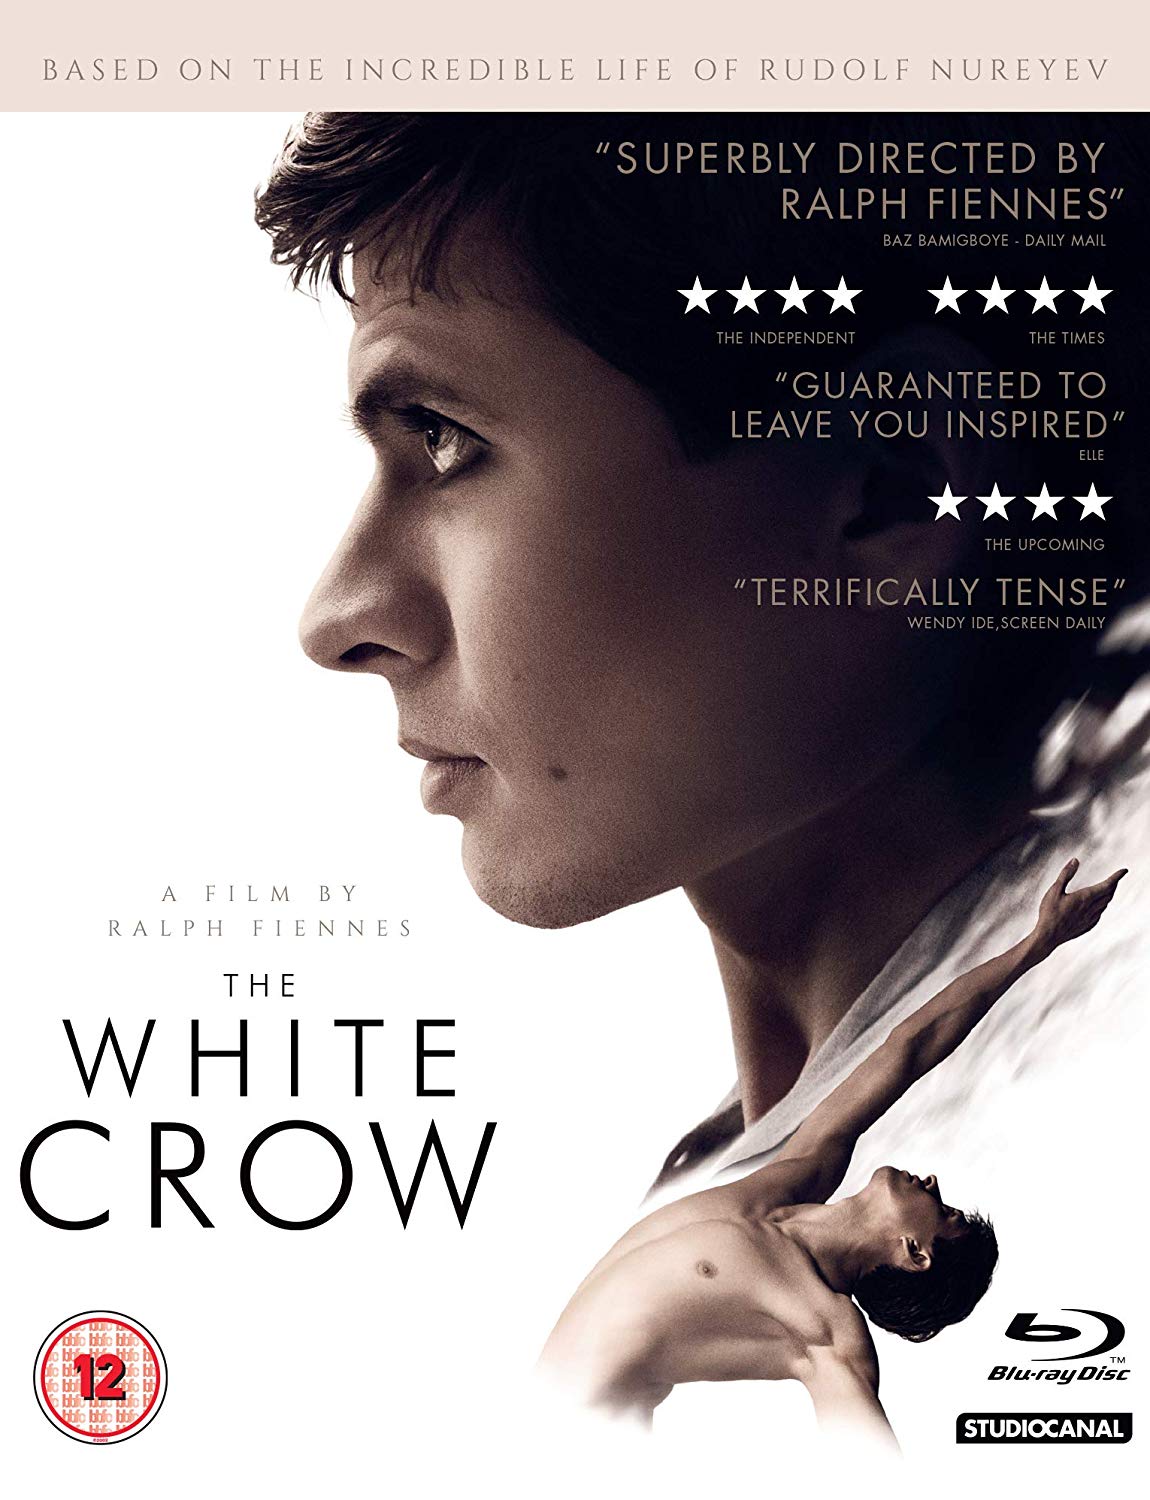 boom competitions - The White Crow